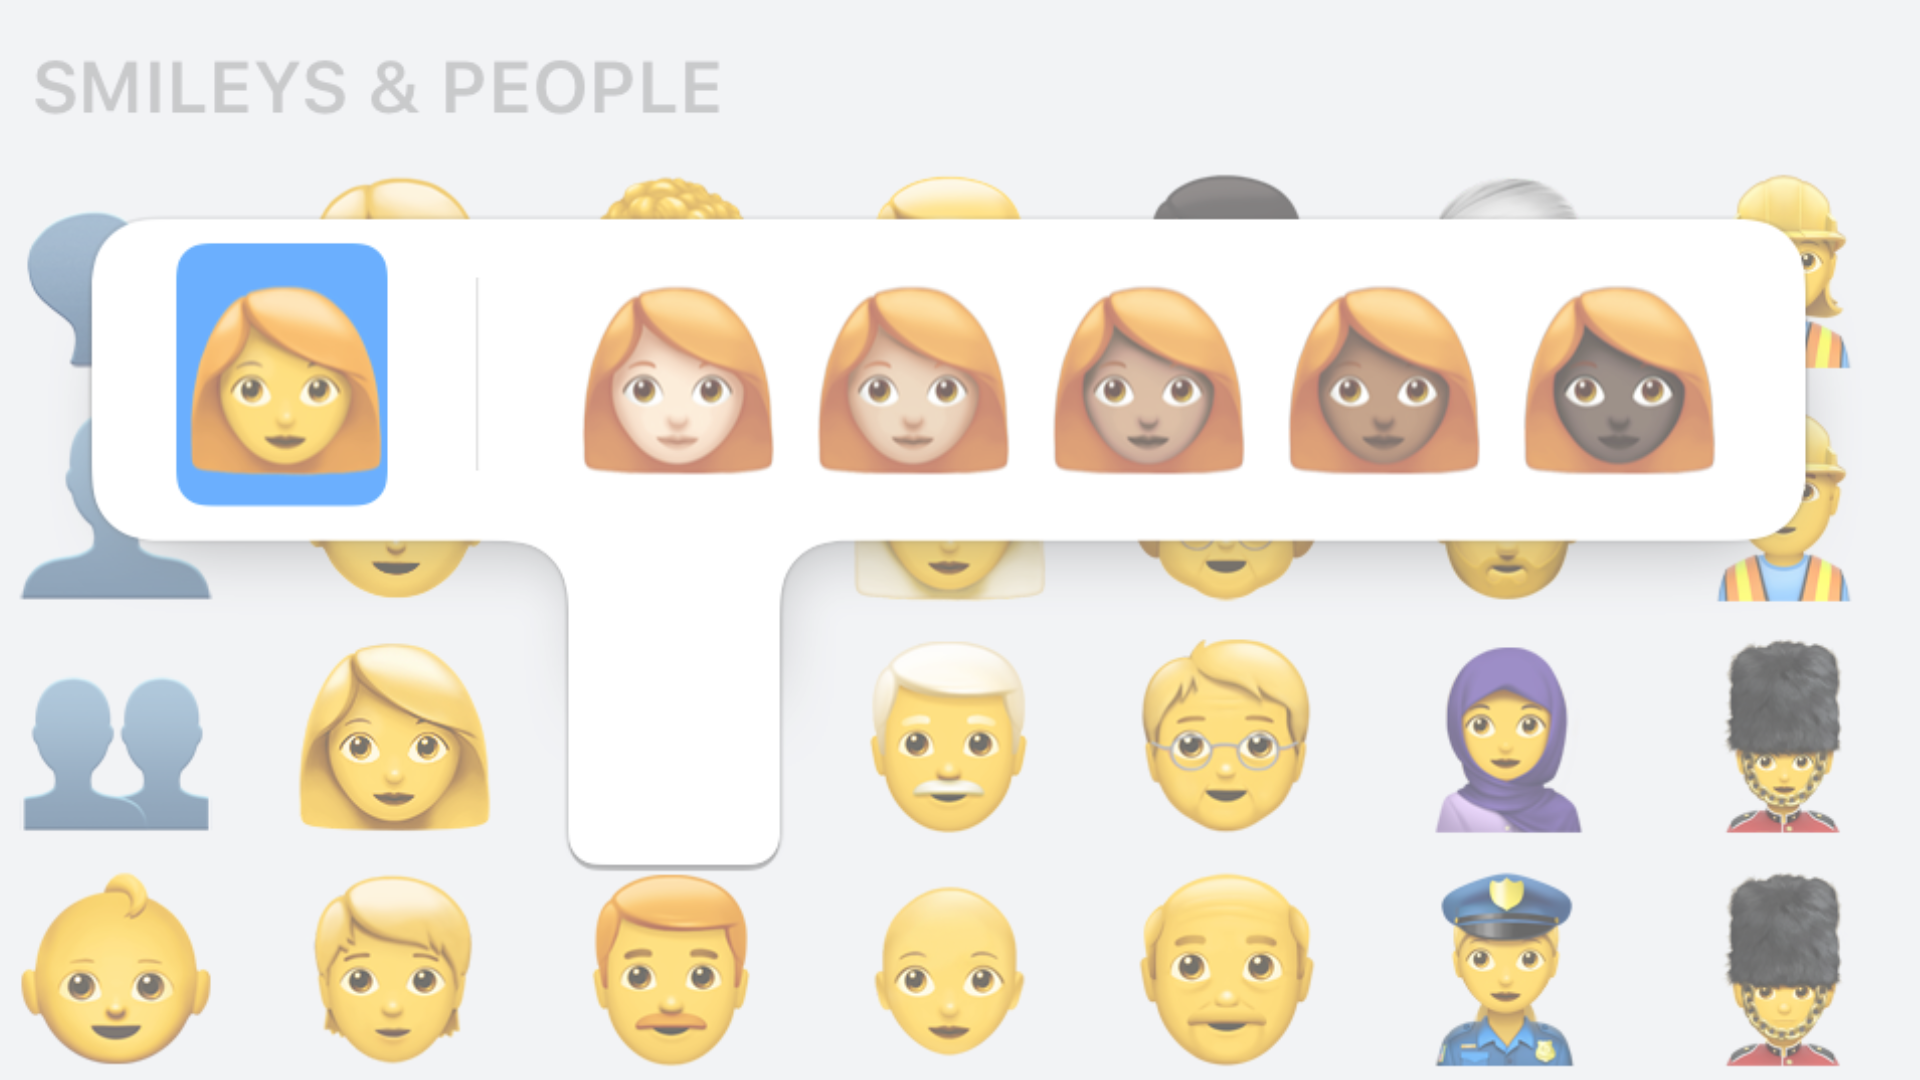 Why Redheads Still Don’t Have More Emoji Options